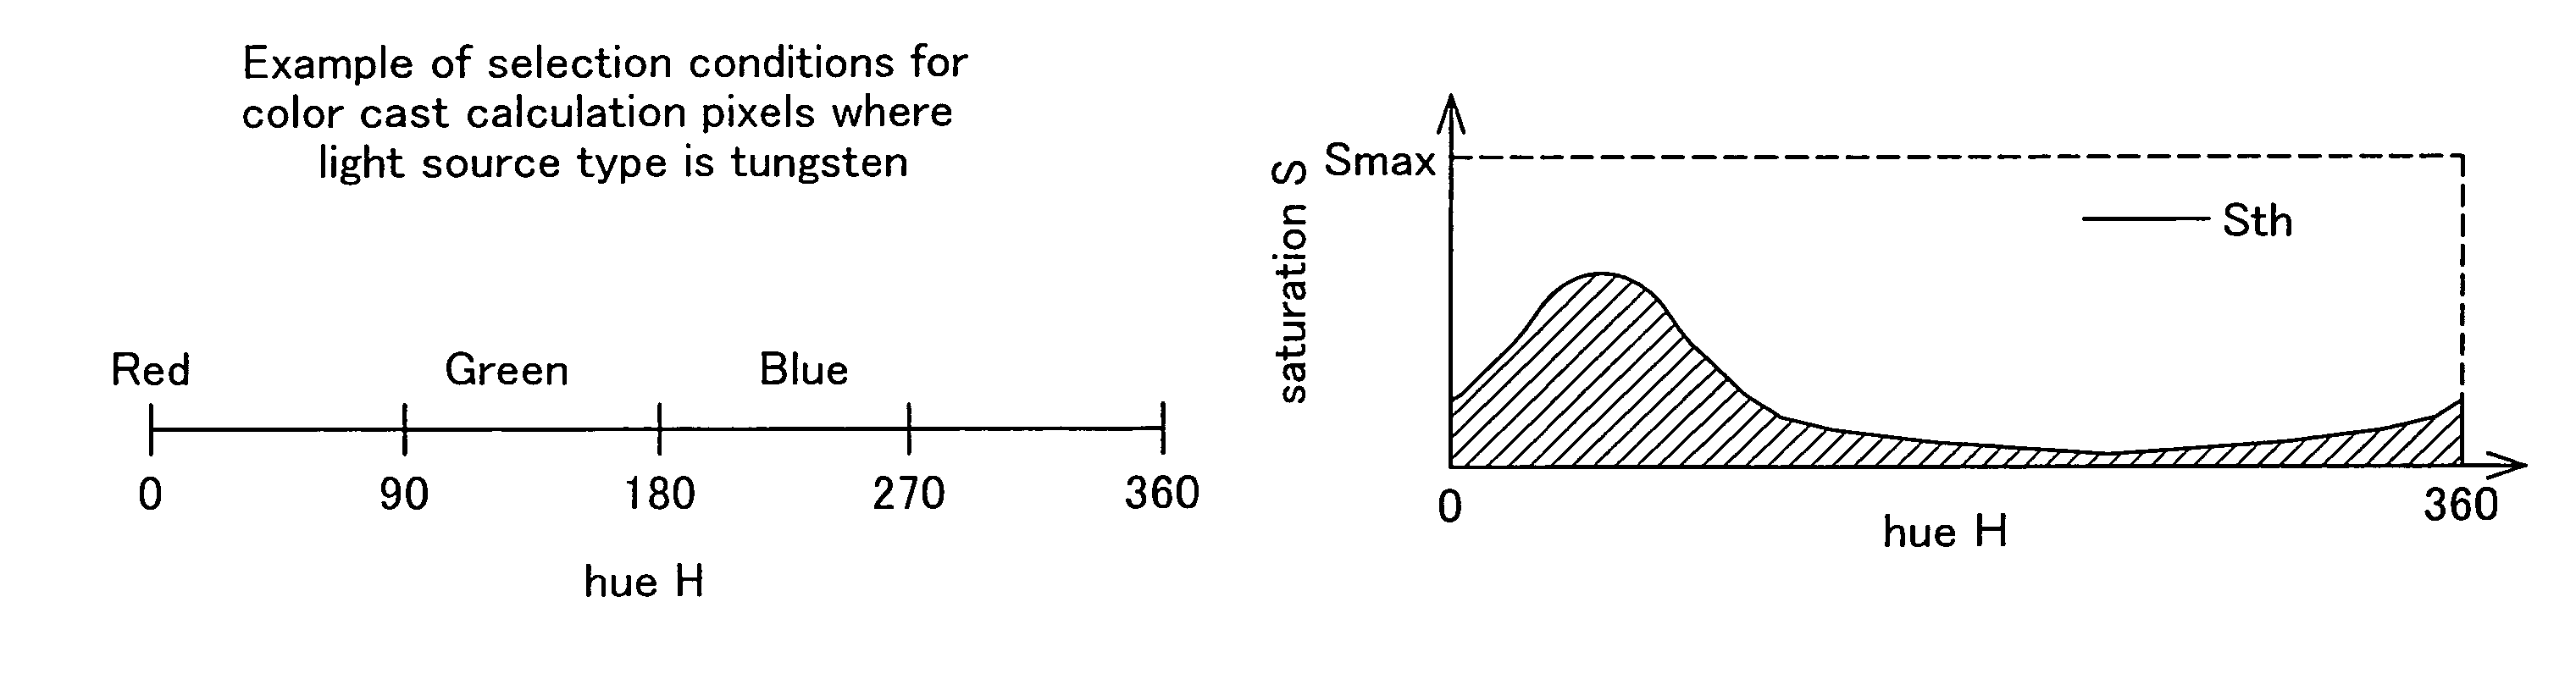 Automatic adjustment of image quality according to type of light source